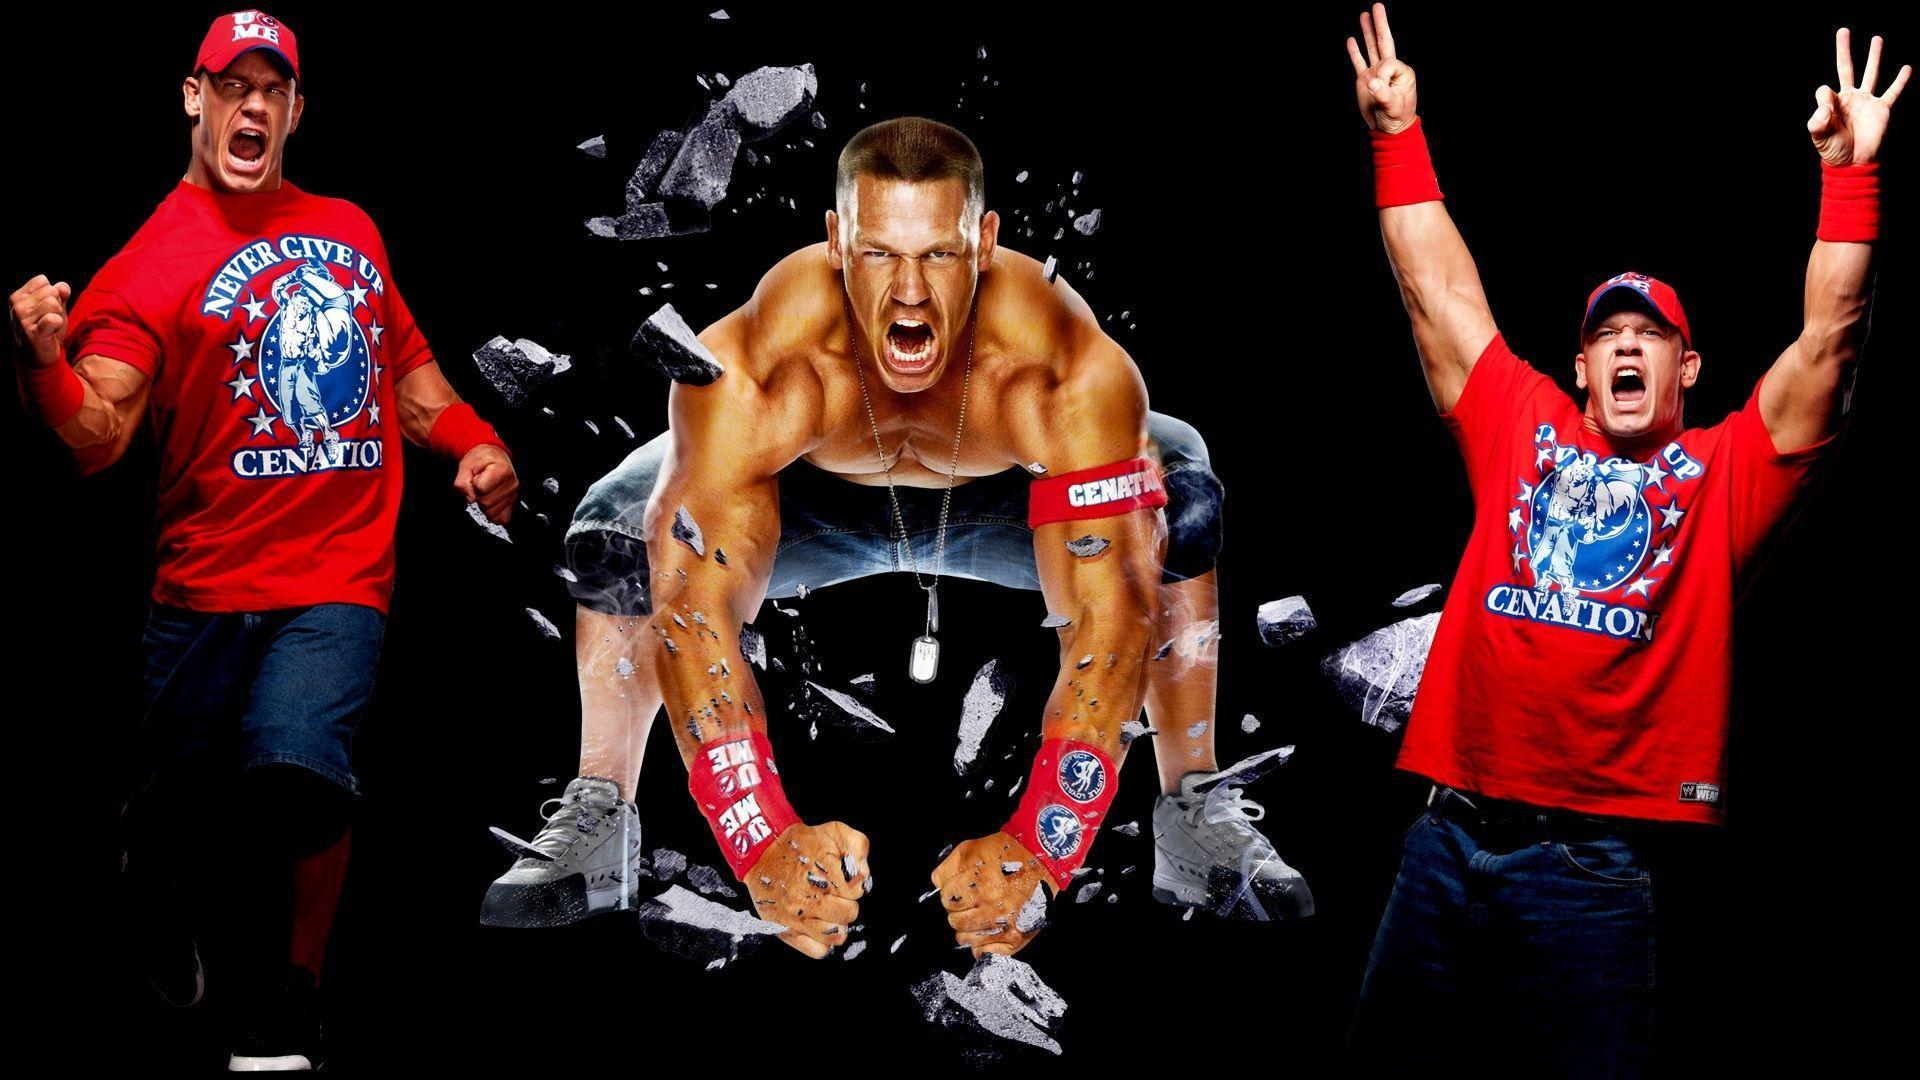 WWE HD Wallpaper for Desktop, iPhone, iPad, and Android. WWE